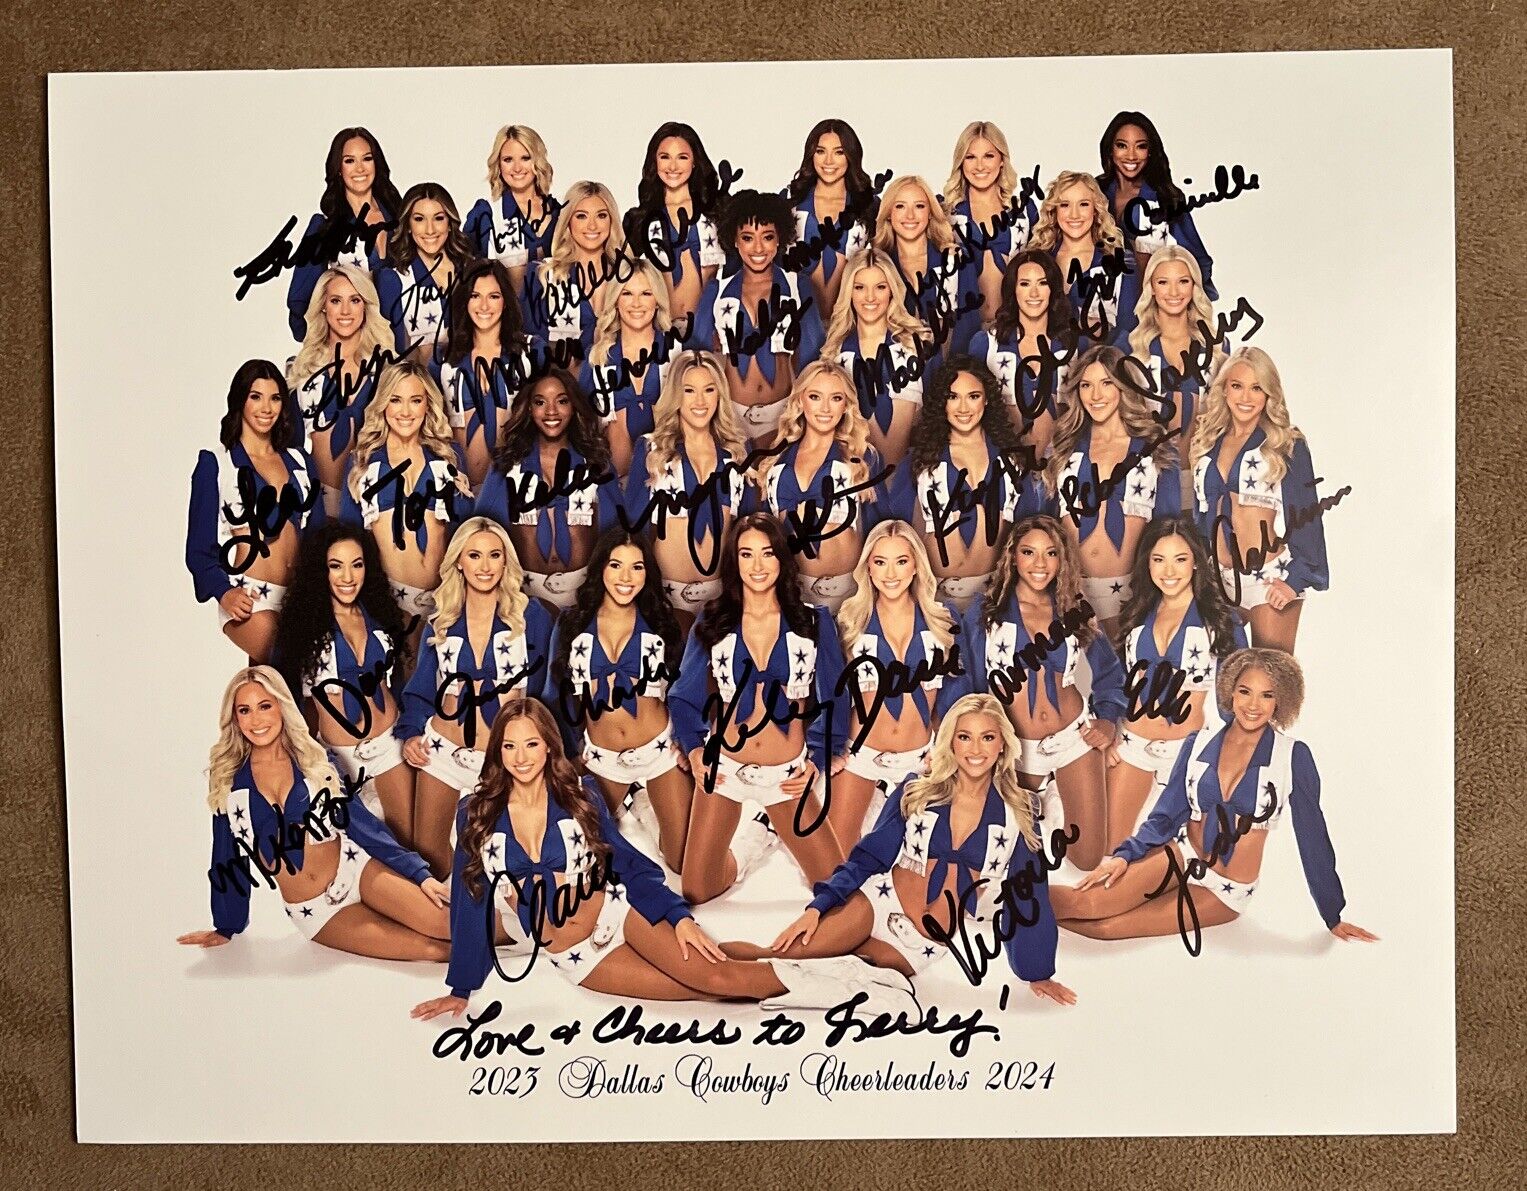 DALLAS COWBOYS CHEERLEADERS AMERICA’S SWEETHEARTS 8.5x11 SIGNED PHOTO TO JERRY